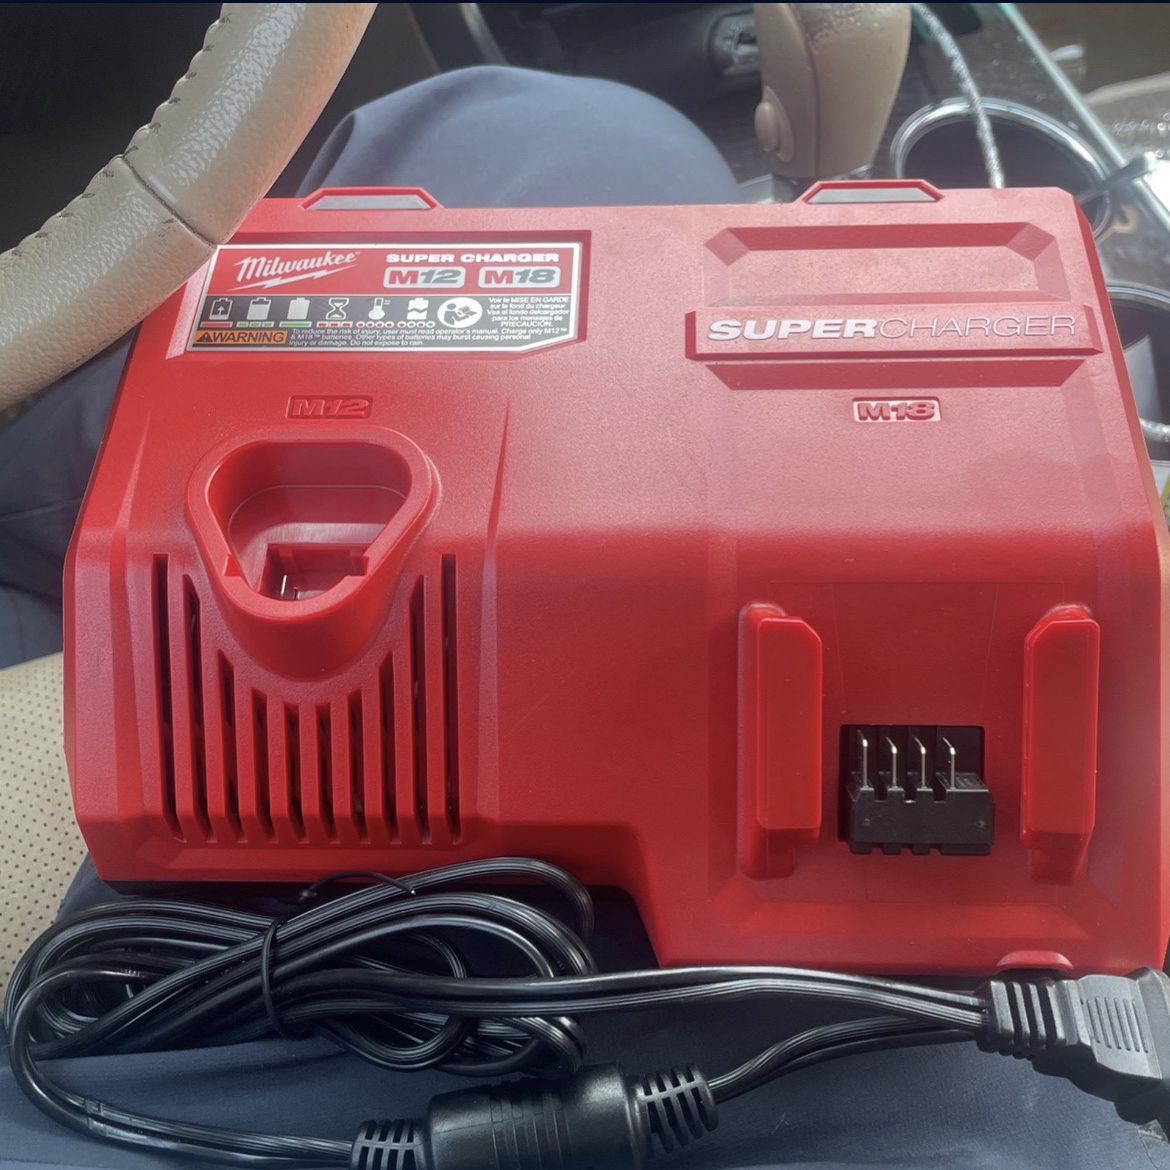 M18 And M12 Super Charger Brand New for Sale in Richmond, TX OfferUp